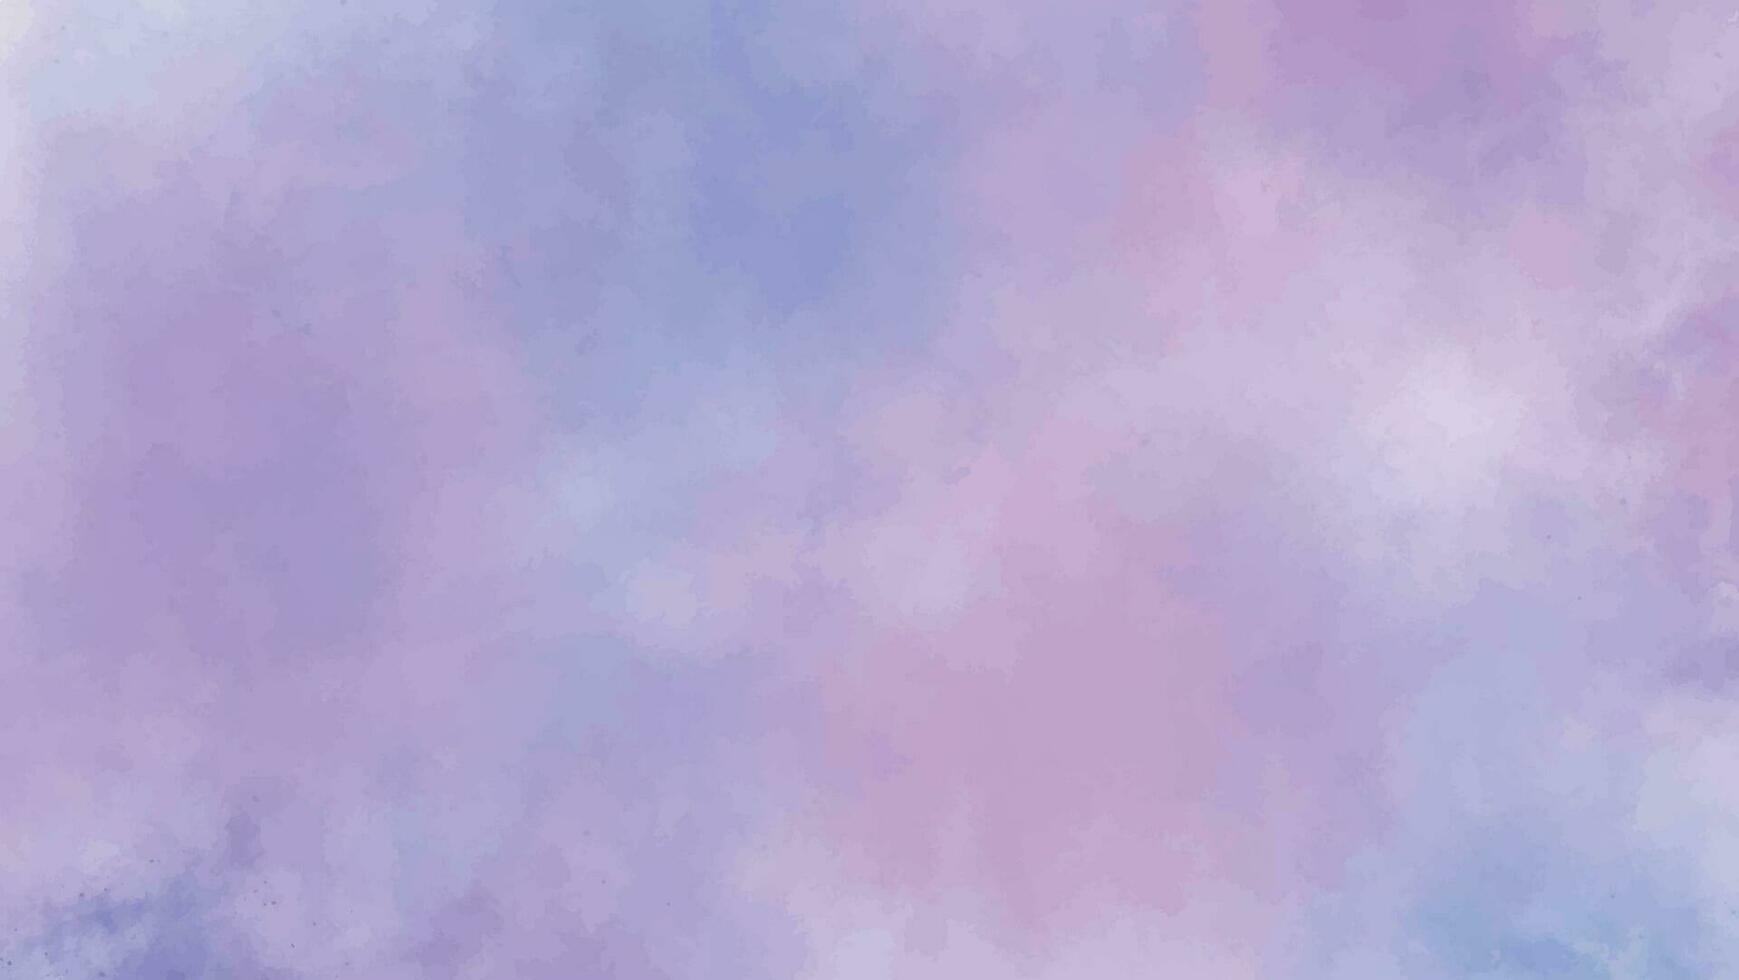 Watercolor colorful background. Purple flame backdrop illustration. Background for banner, flyer or advertisement graphic design. Digital art painting. Cloudy sky. vector